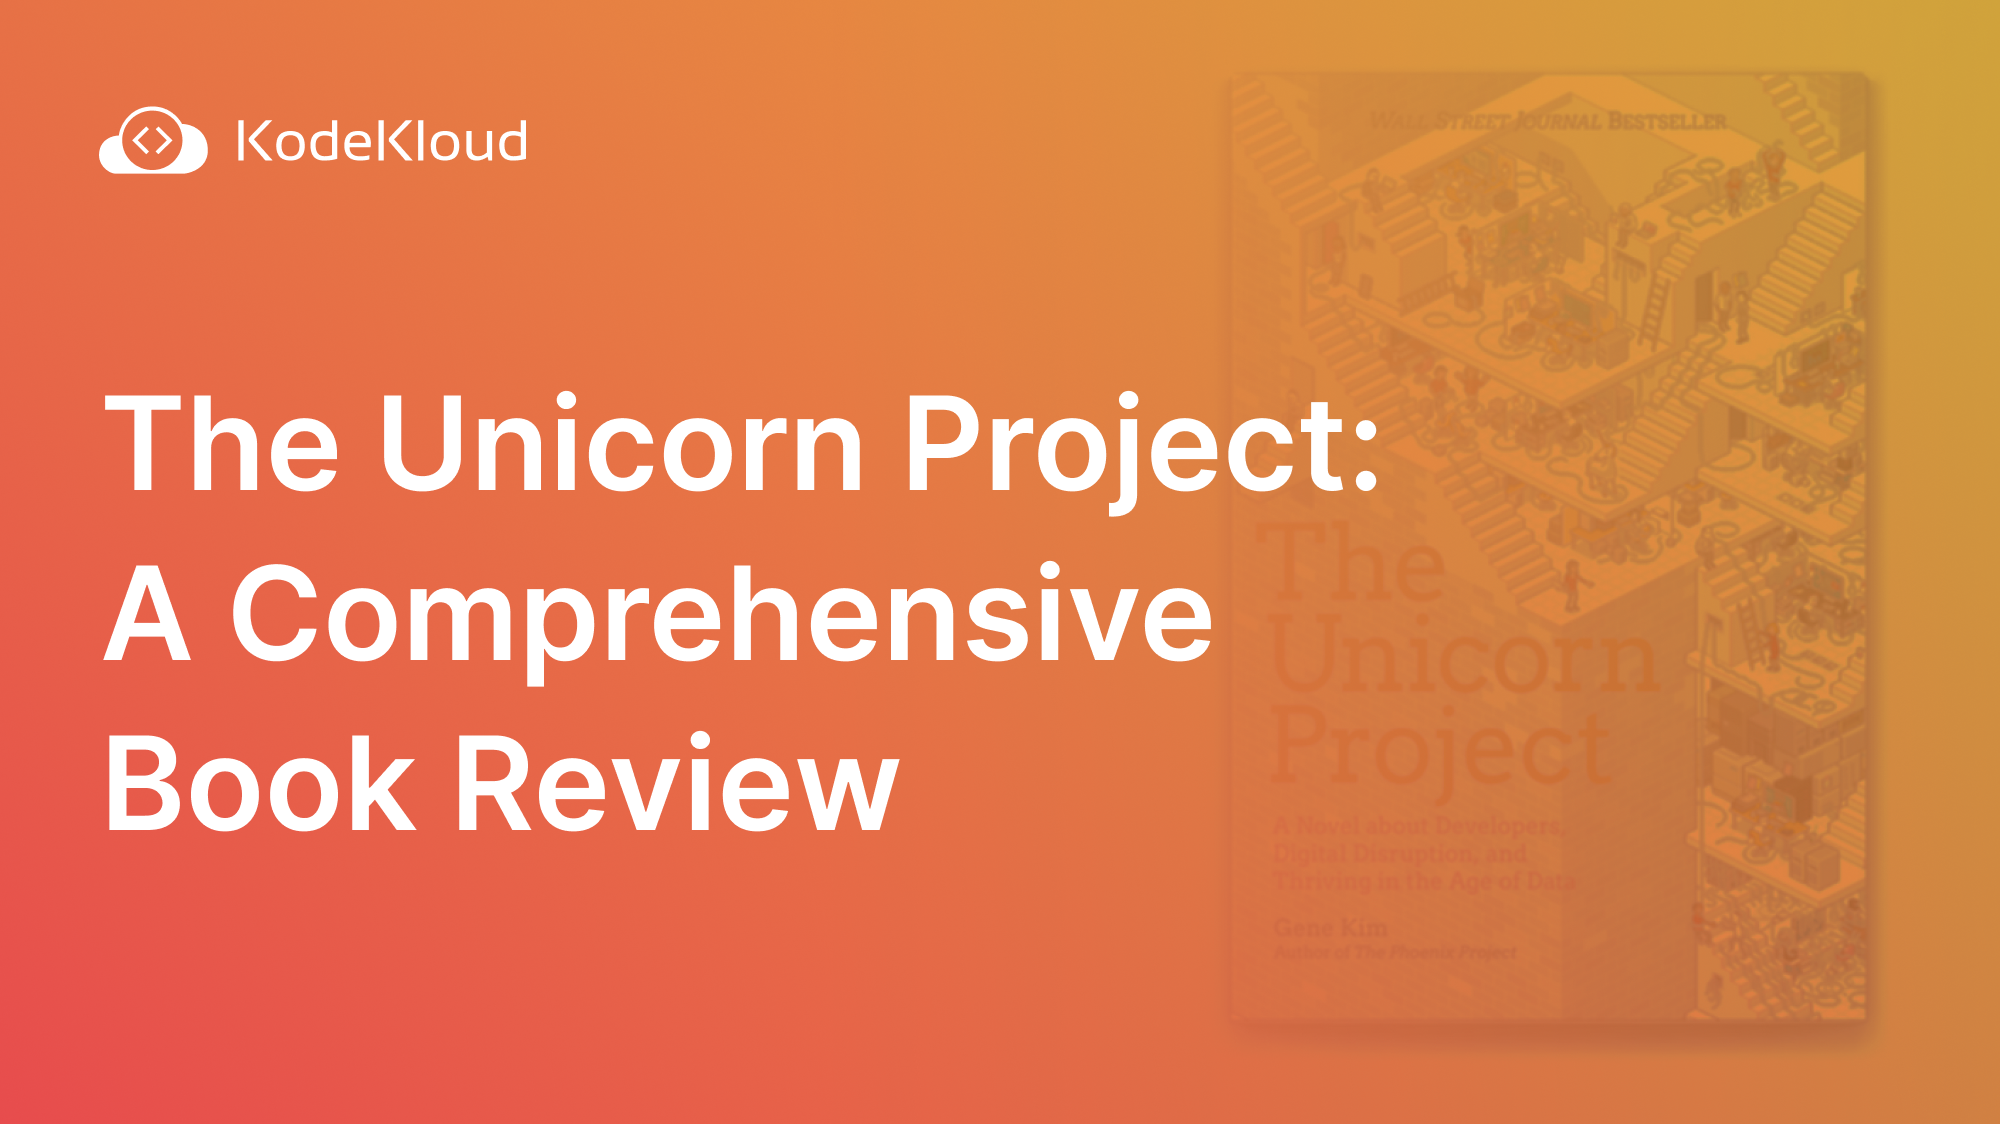 The Unicorn Project Book Review